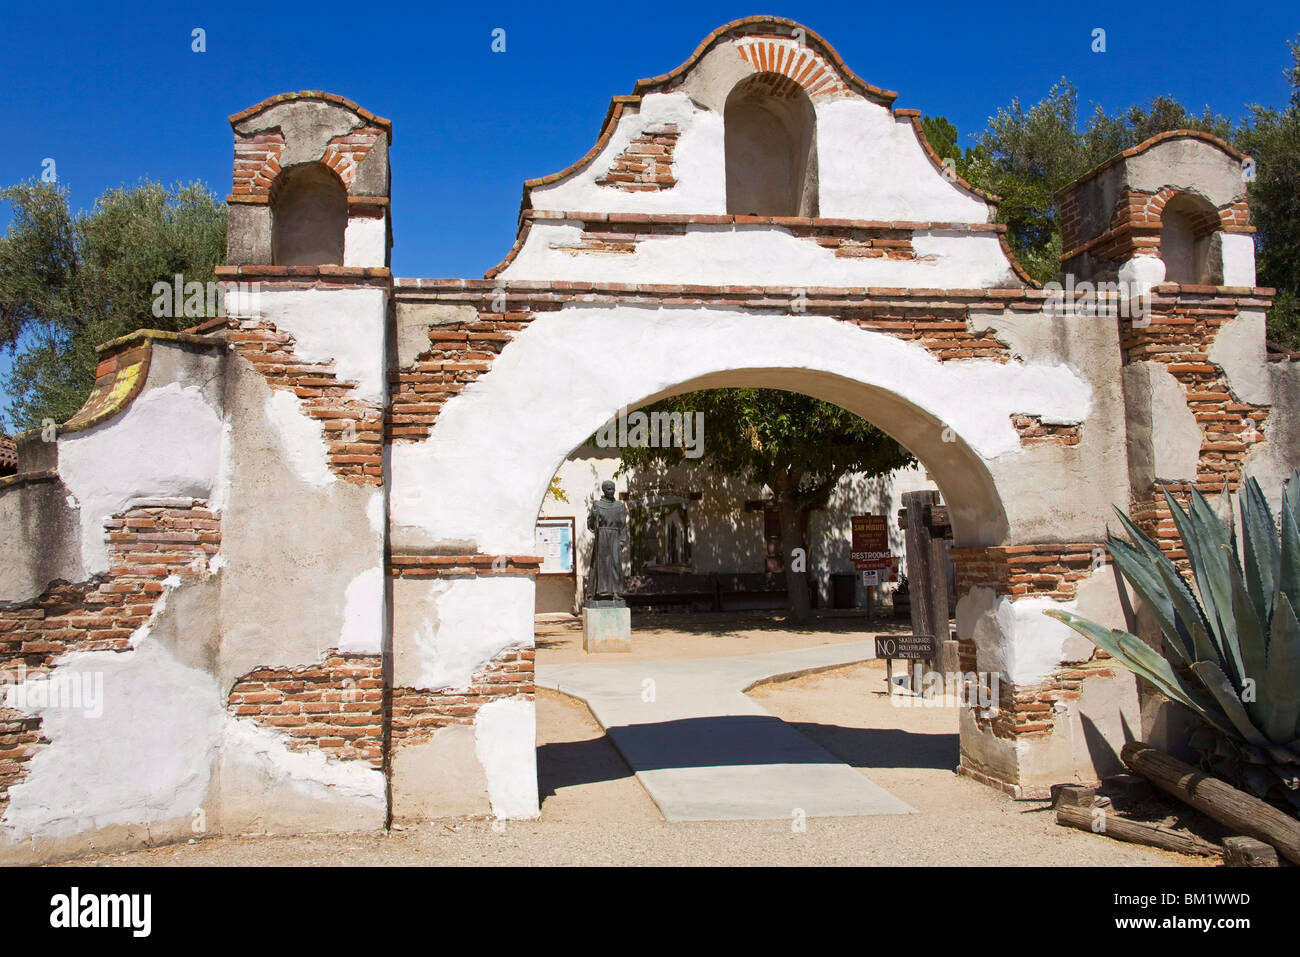 Entrance to Mission San Miguel Arcangel, San Miguel, California, United States of America, North America Stock Photo